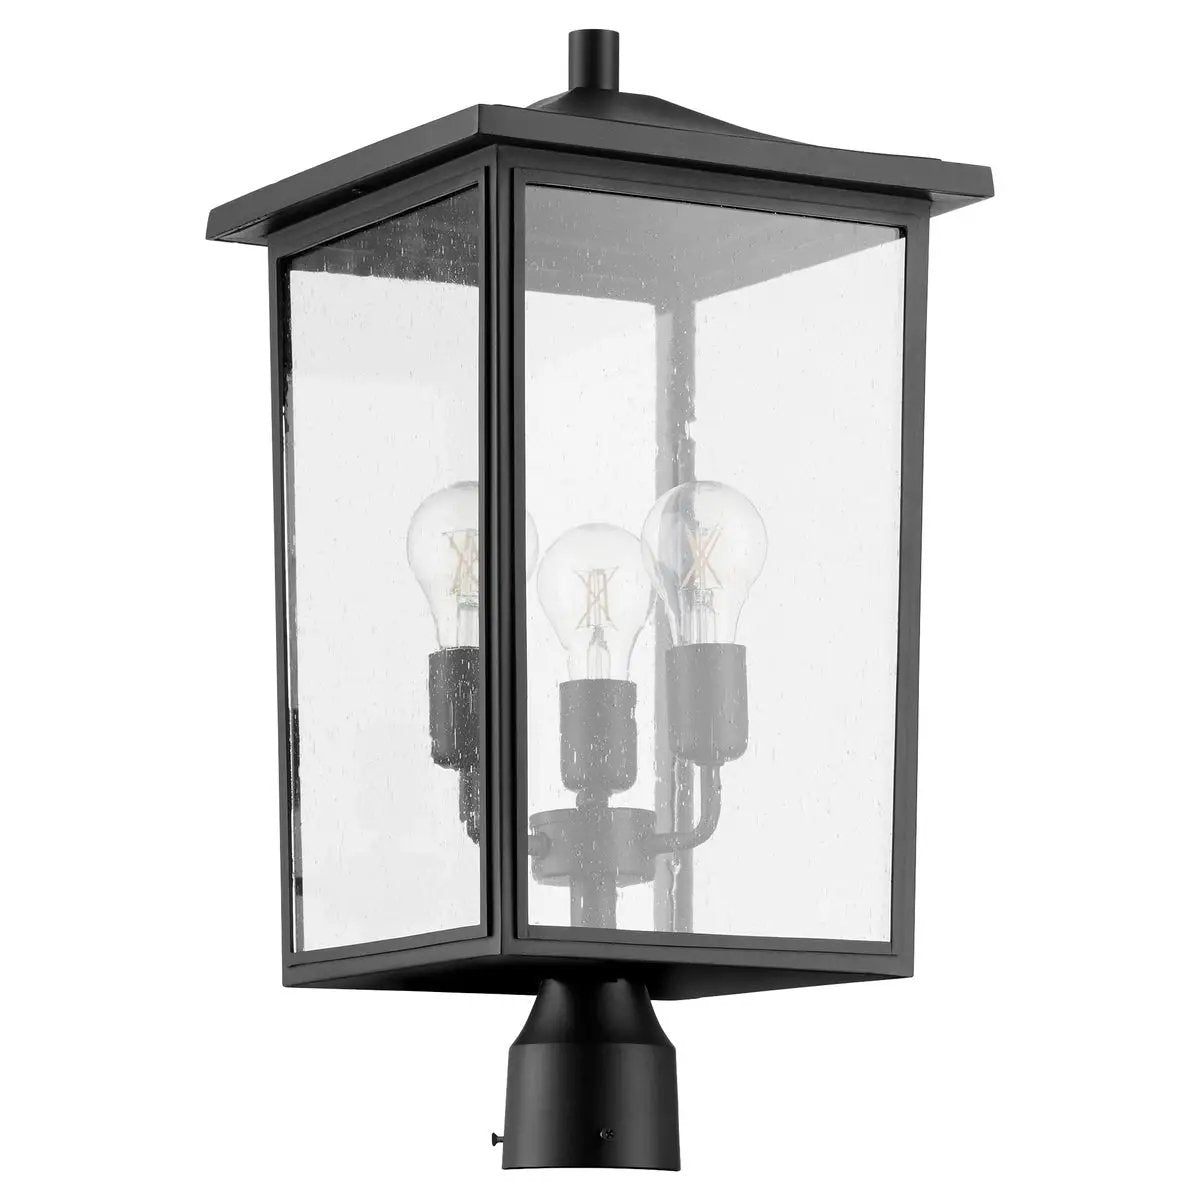 A black farmhouse outdoor post light with clear glass enclosure, featuring three 60W medium base light sources. Provides a warm ambient glow and adds a classic touch to your outdoor ensemble. Dimensions: 11&quot;W x 21.5&quot;H.